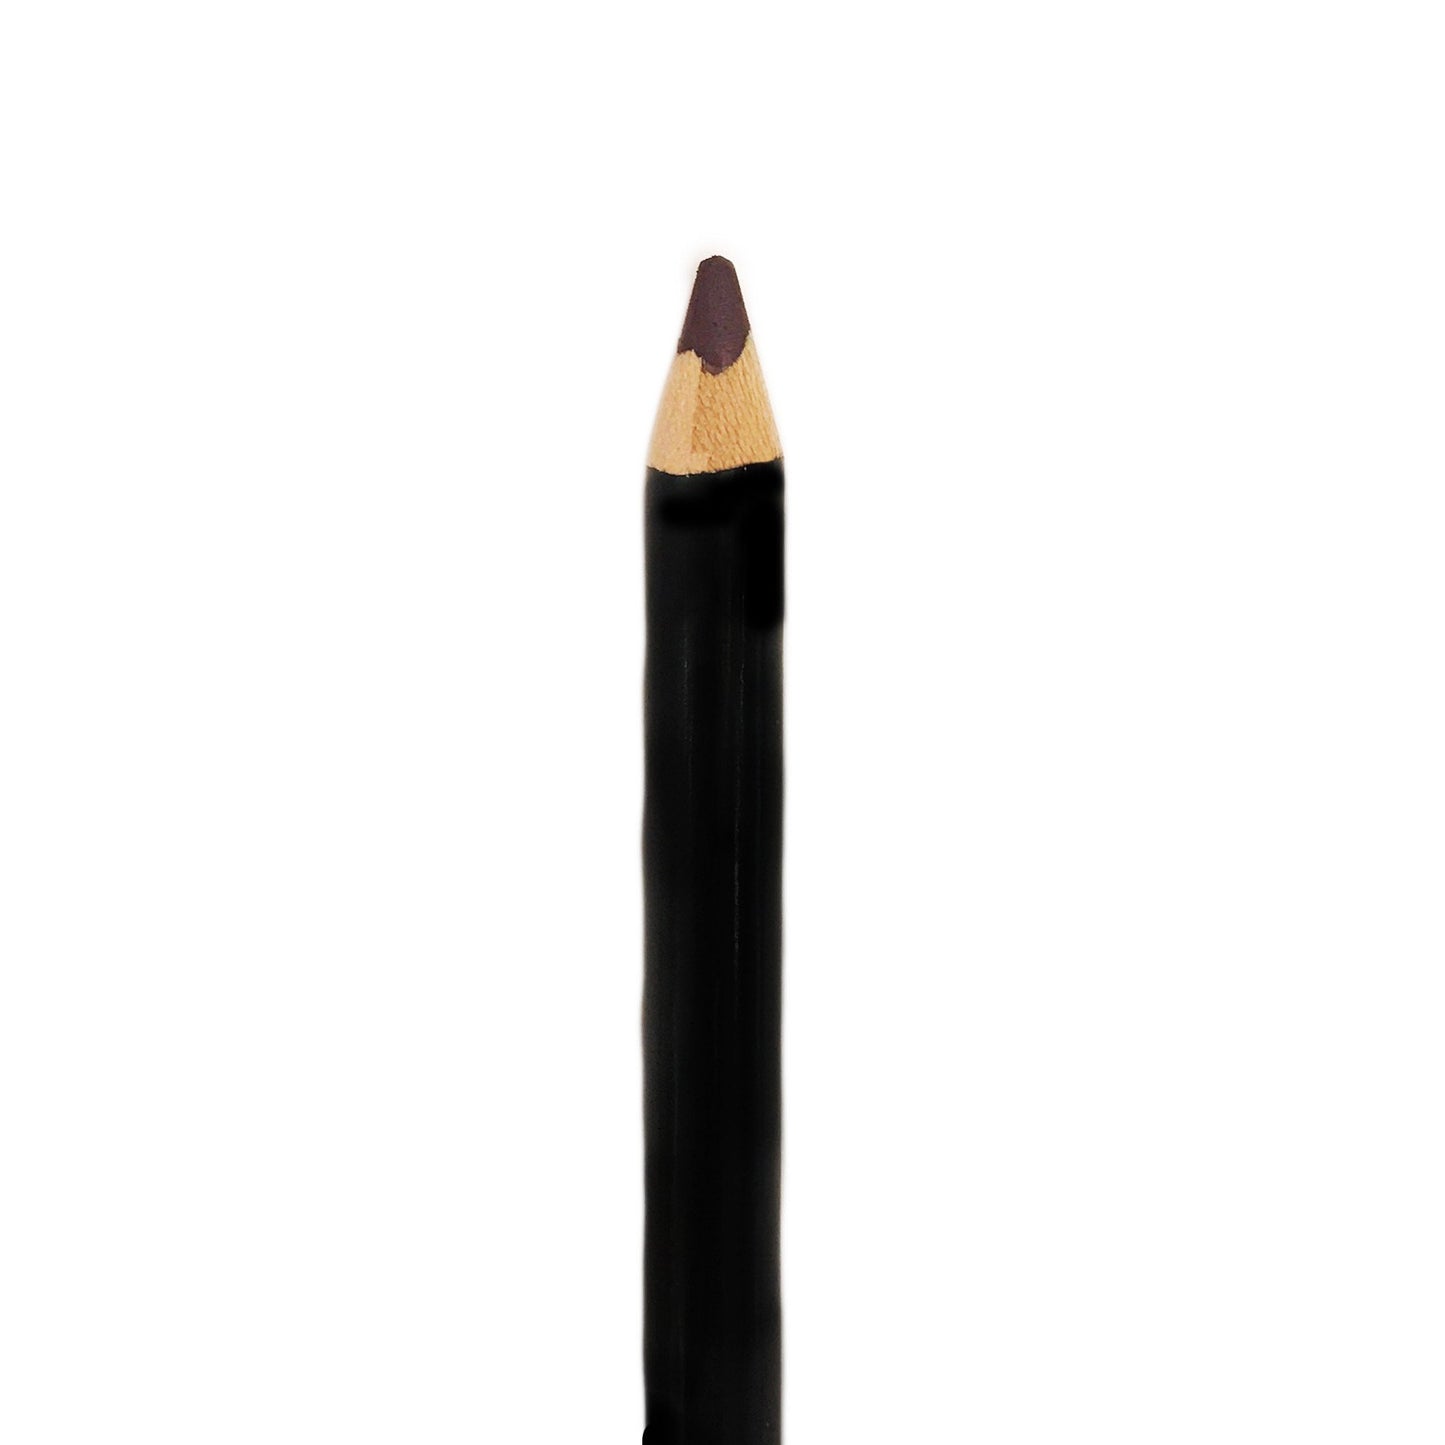 Grape Eye Liner Pencil ready for your name by Indigo Private Label Cosmetics